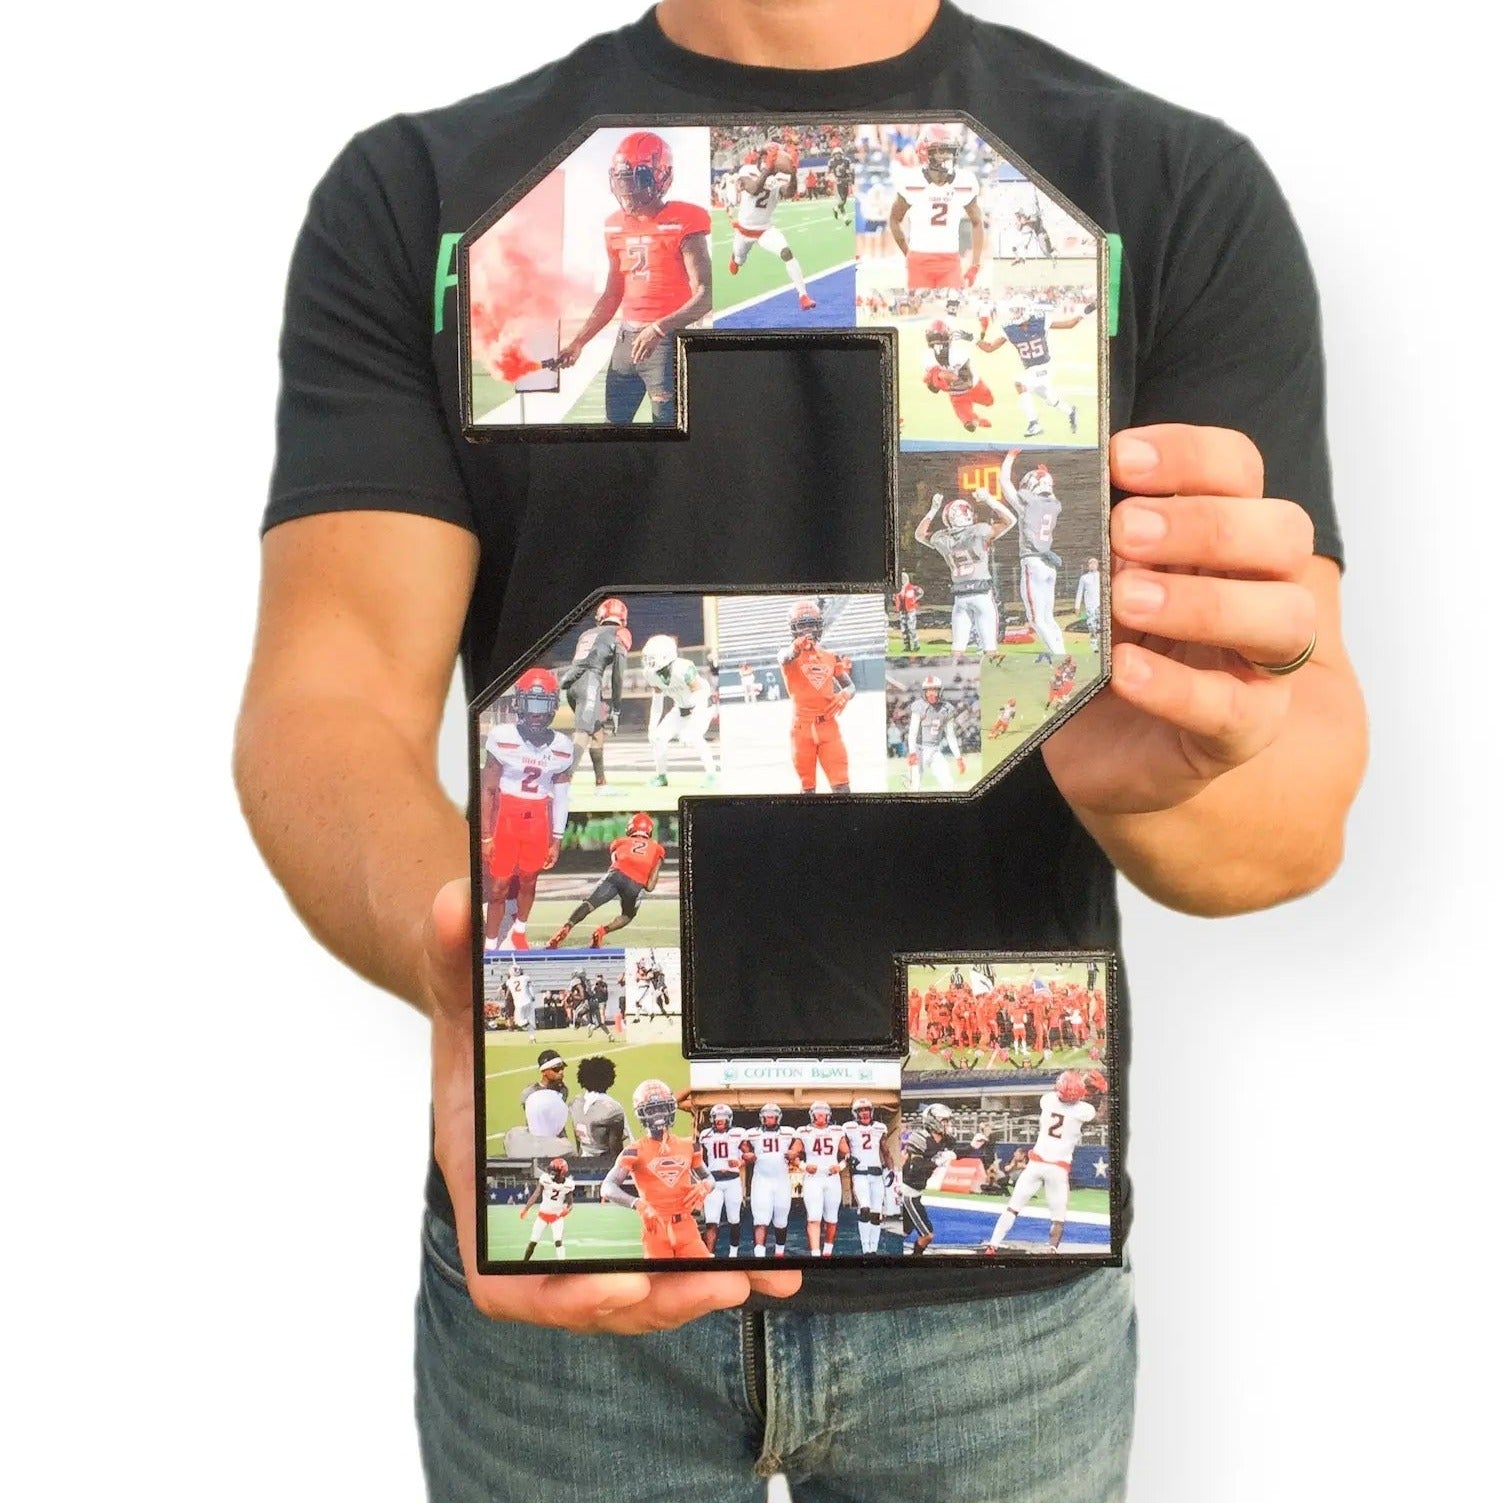 Senior Night Football Ideas, 12 inch #2 Football jersey number collage. Shop now at Collage and Wood!